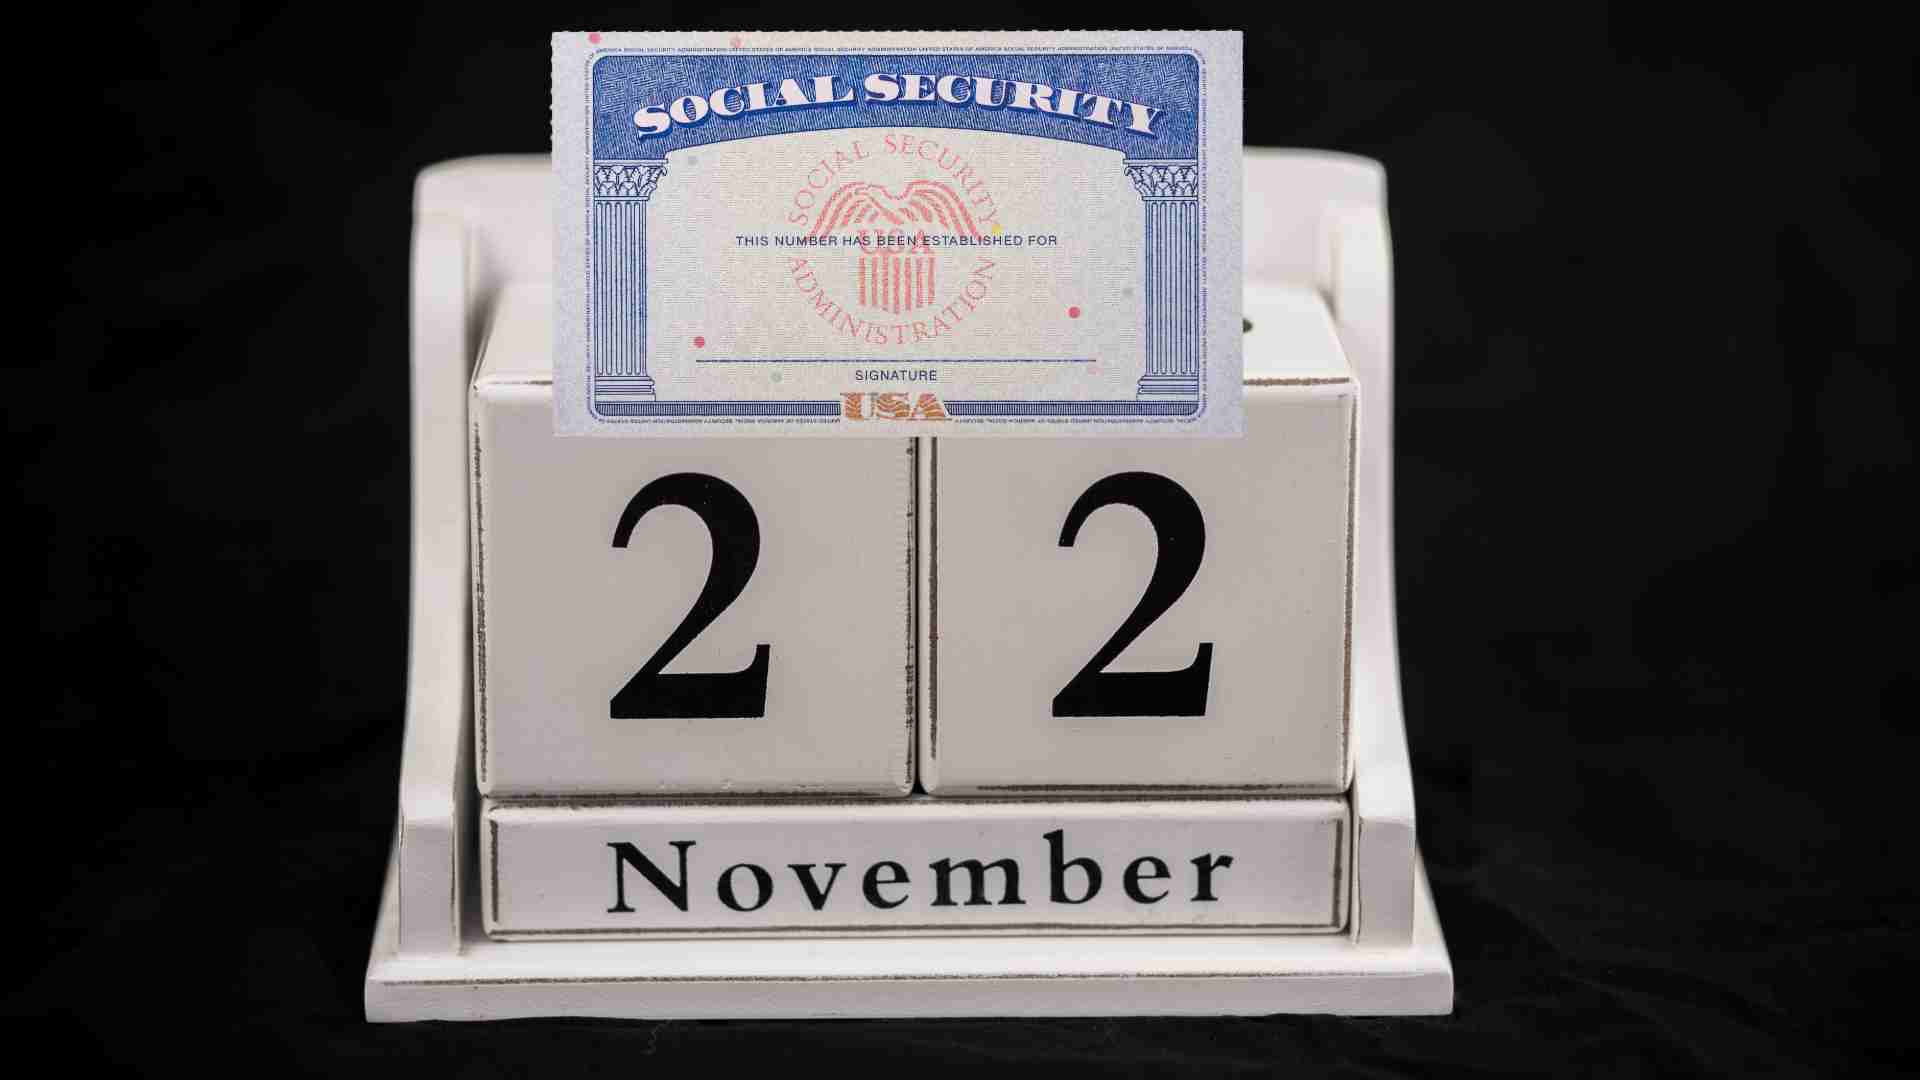 SSDI payments will finish on this date in November